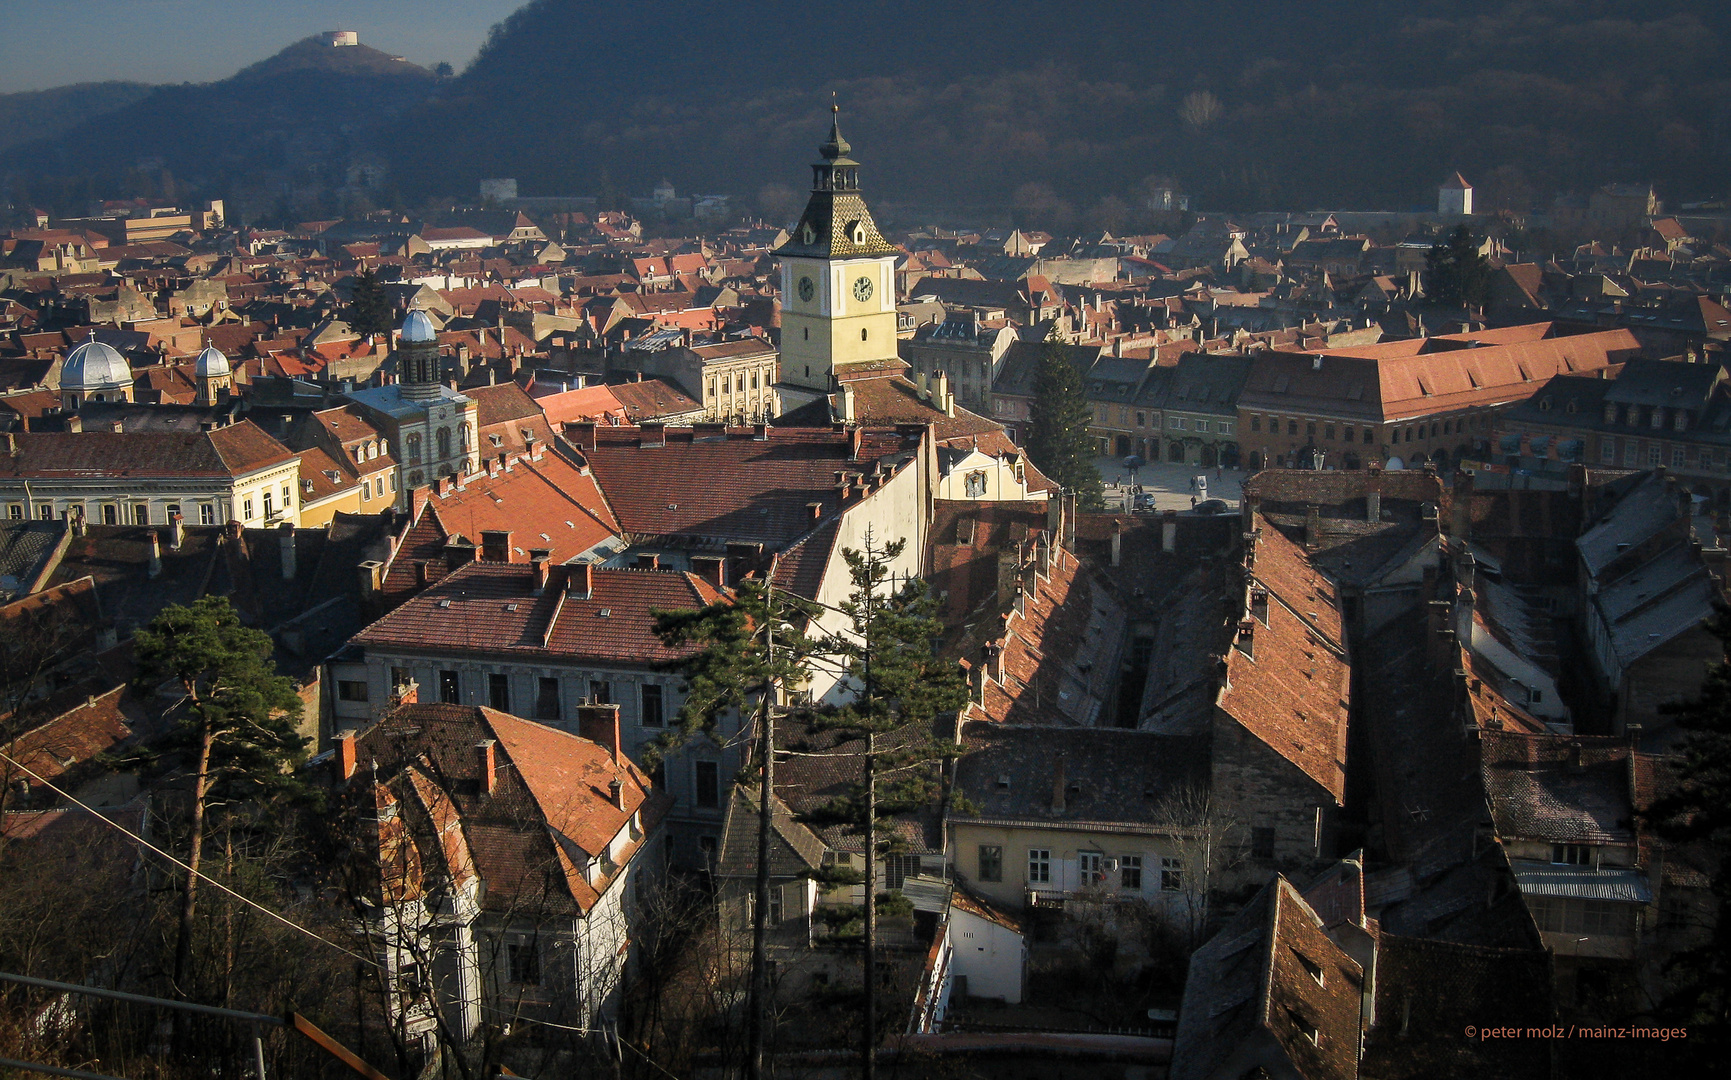 Brasov/Kronstadt - View over the old town | Romania December 2005